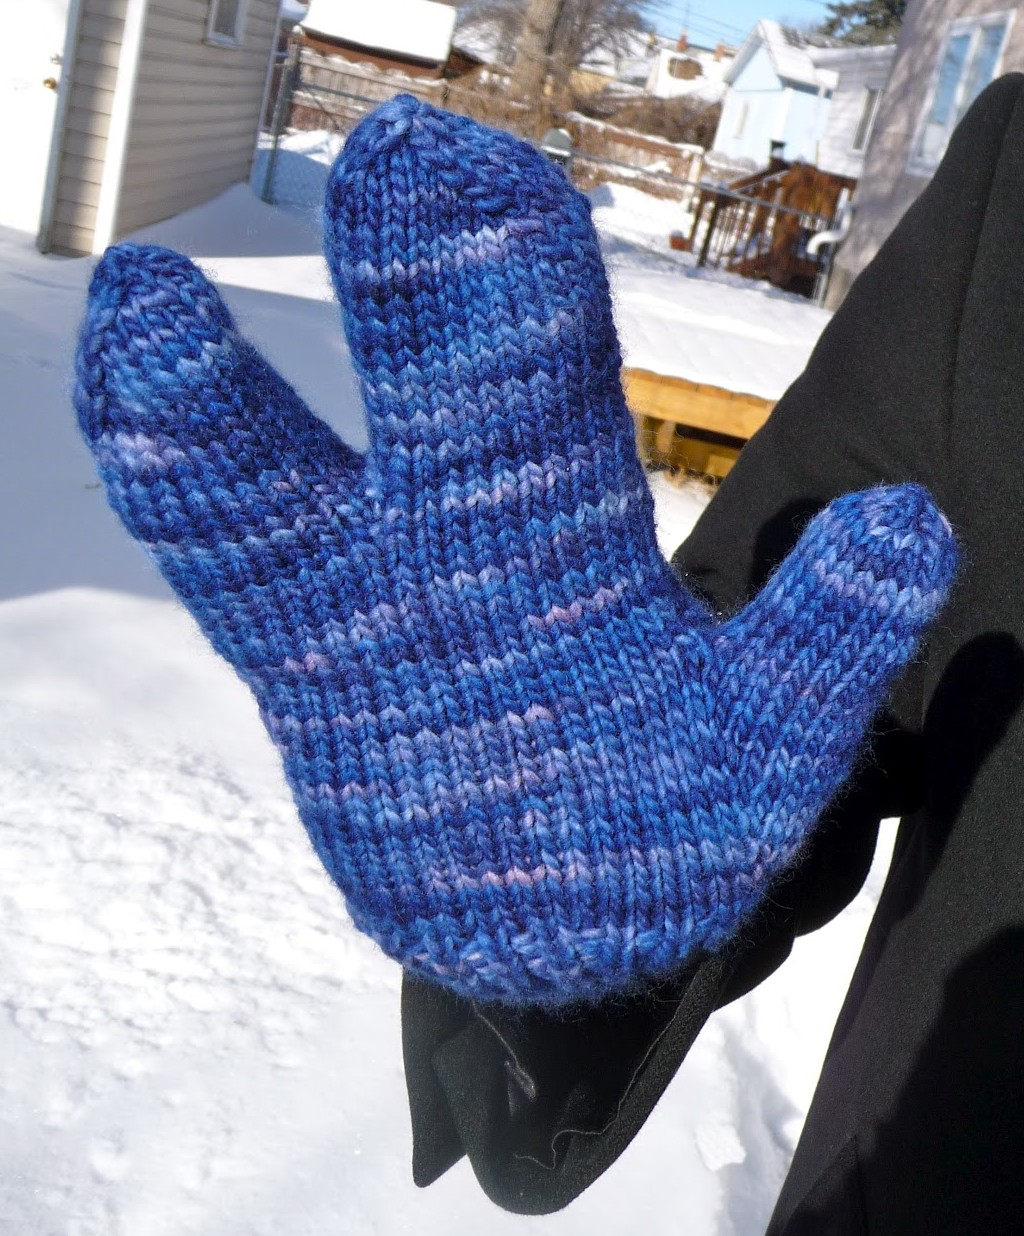 Knitting Pattern For Gloves Fun Mitten And Glove Knitting Patterns In The Loop Knitting